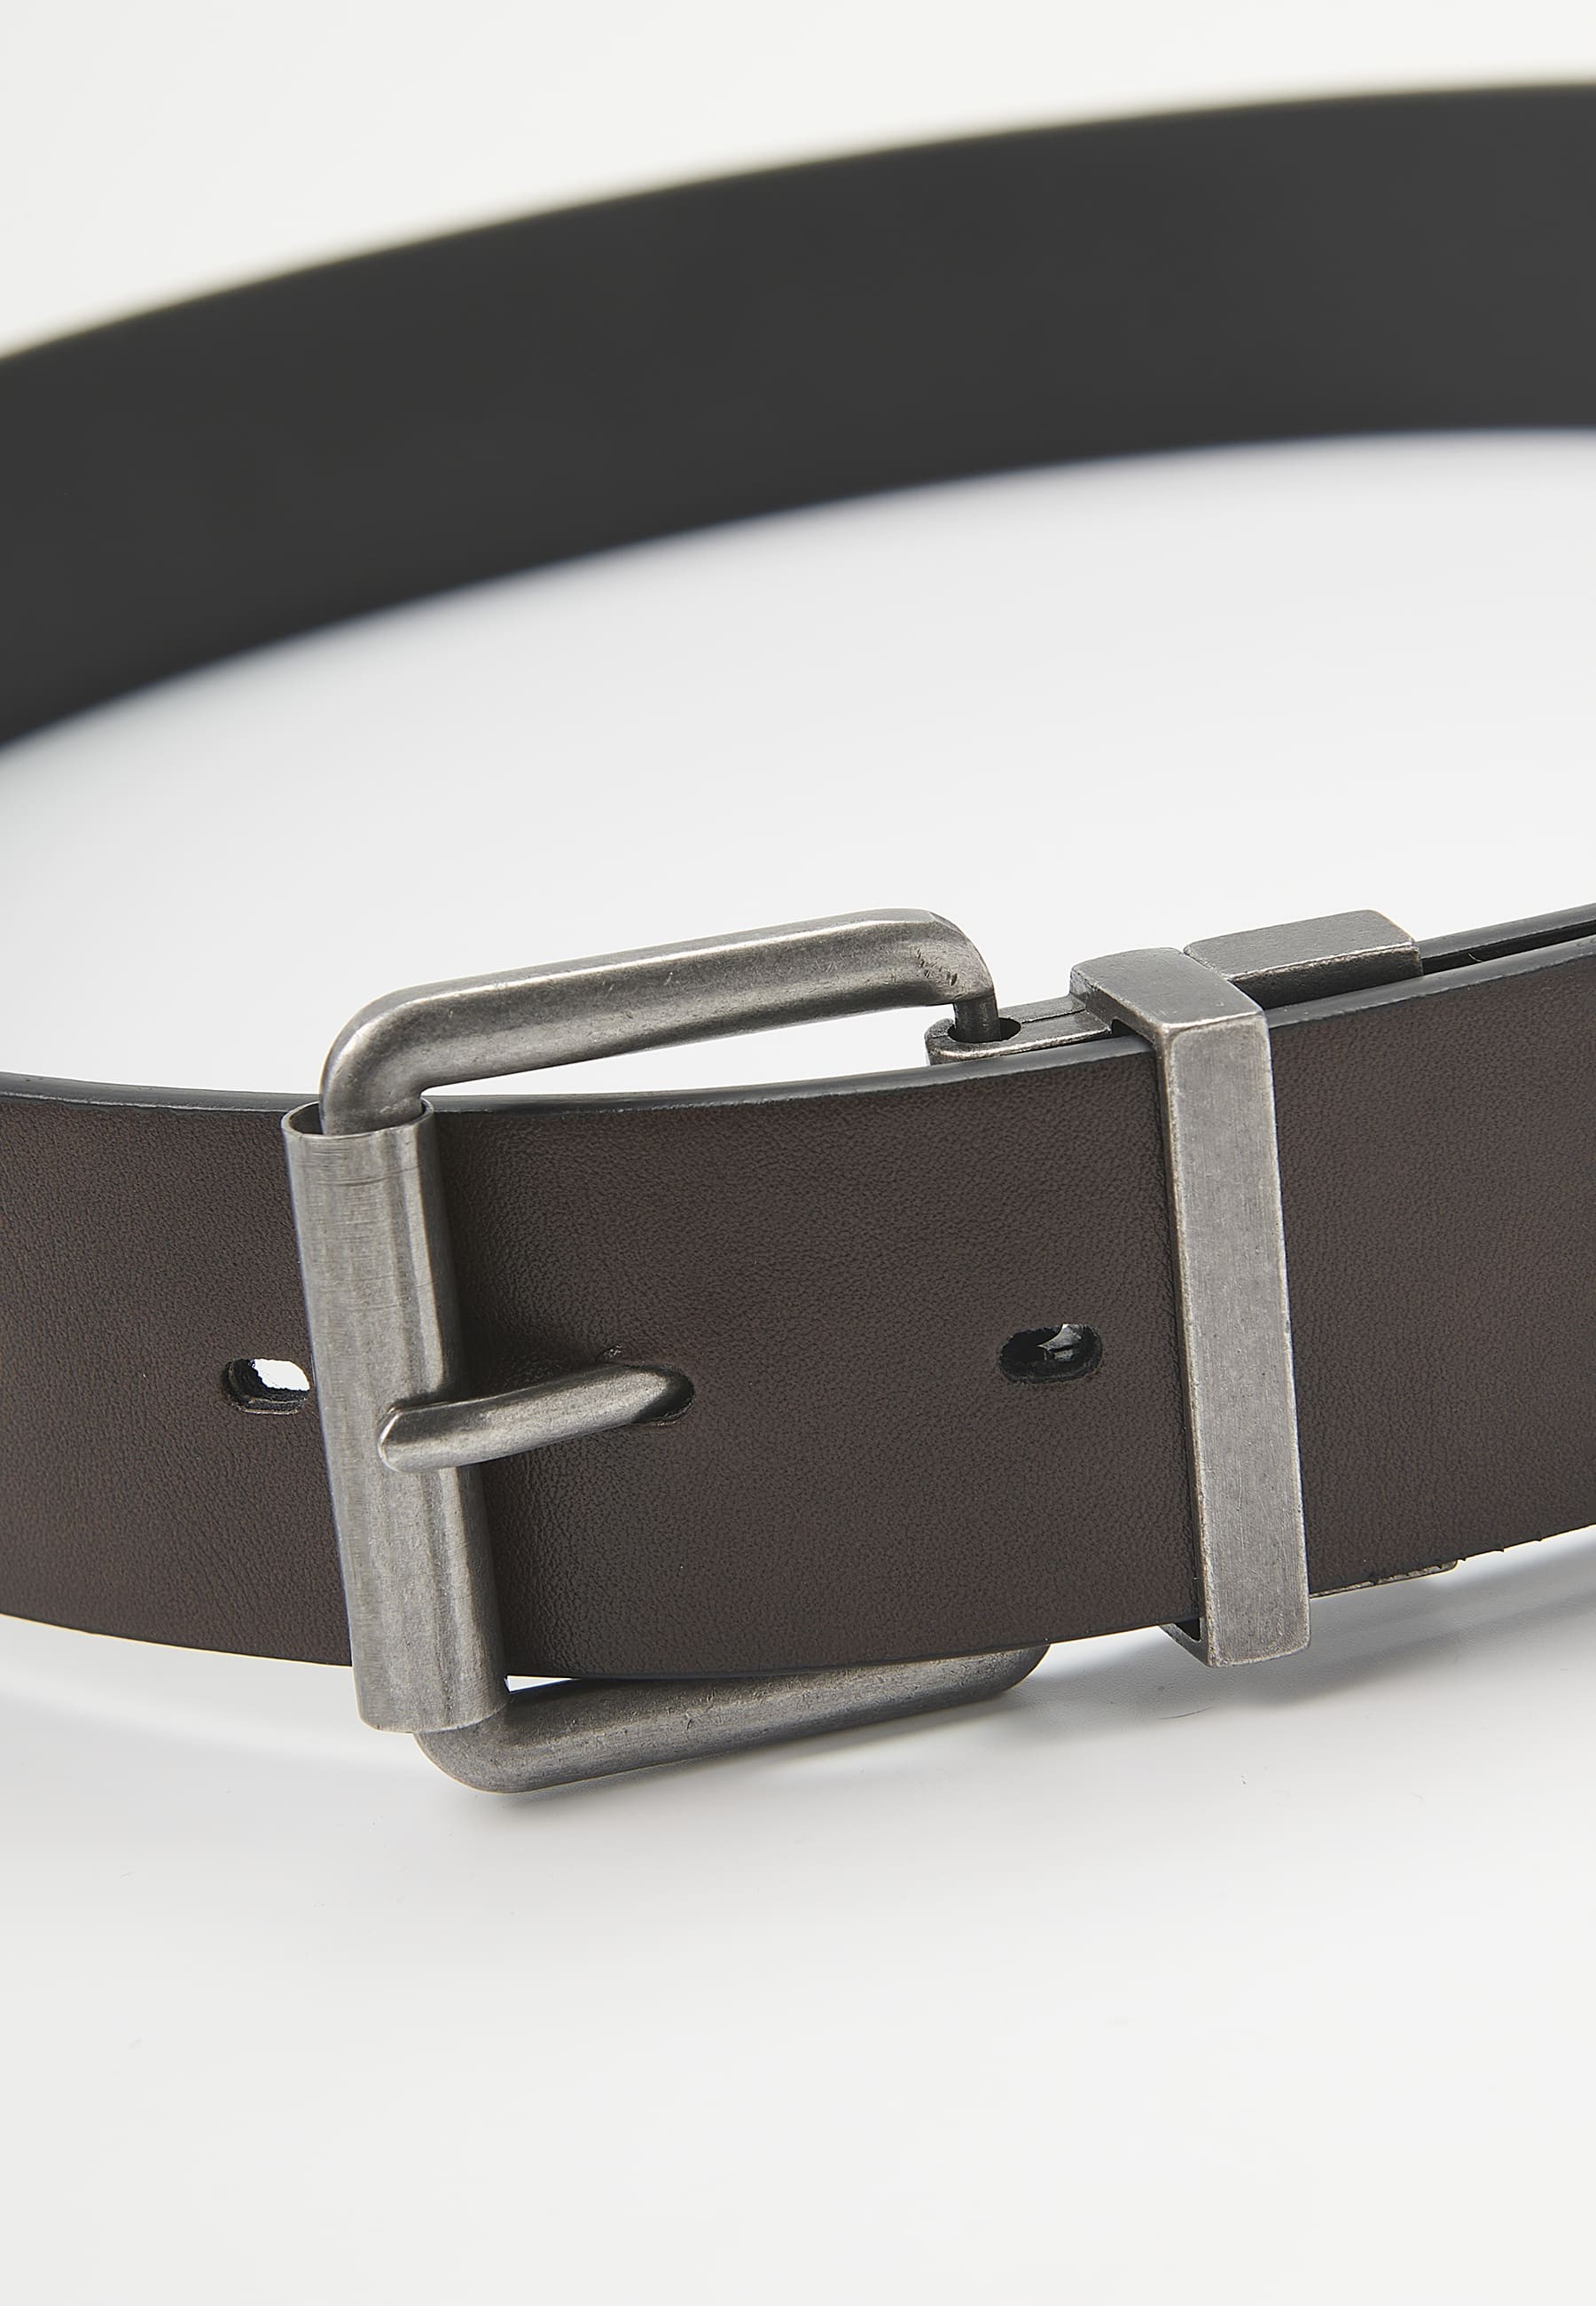 Reversible belt with one side made of leather. Closure with metal buckle and black and brown pin for Men